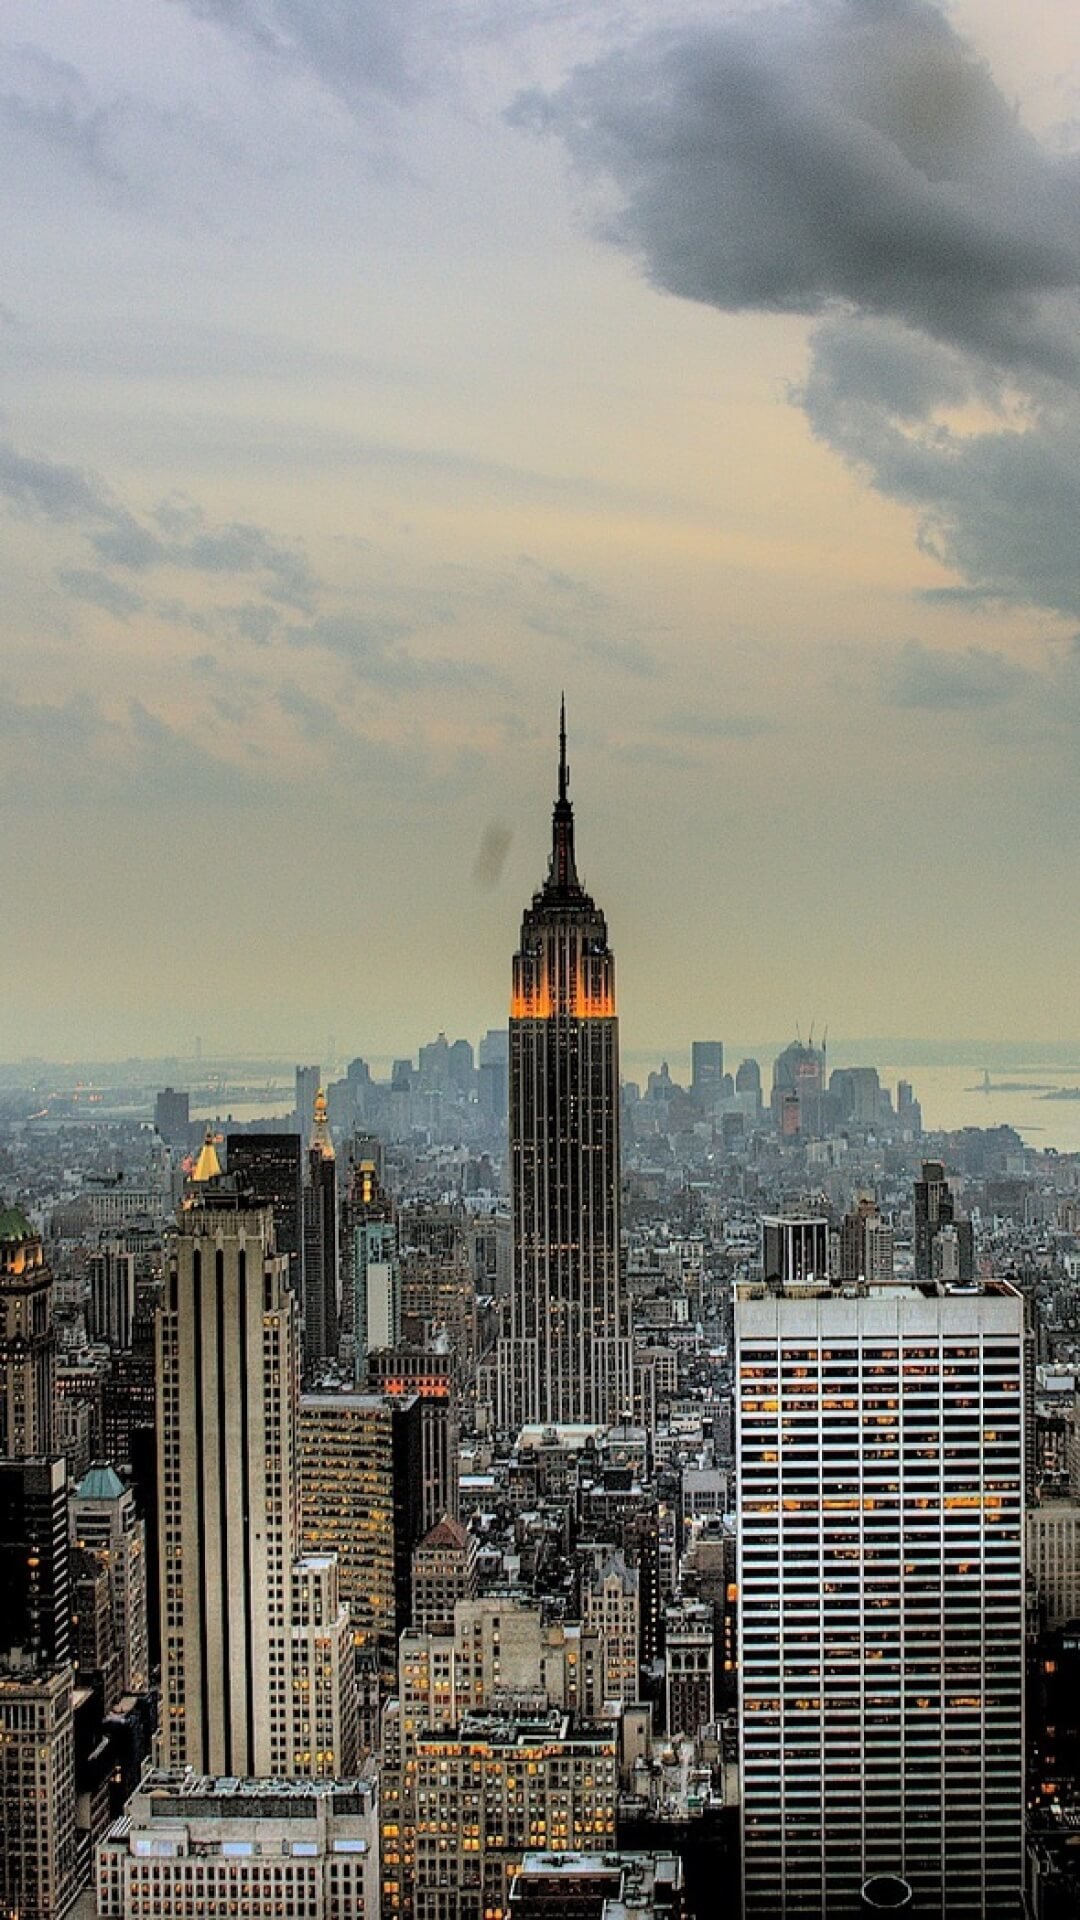  Iphone  6 Backgrounds  Tumblr  New York  HD Wallpaper  